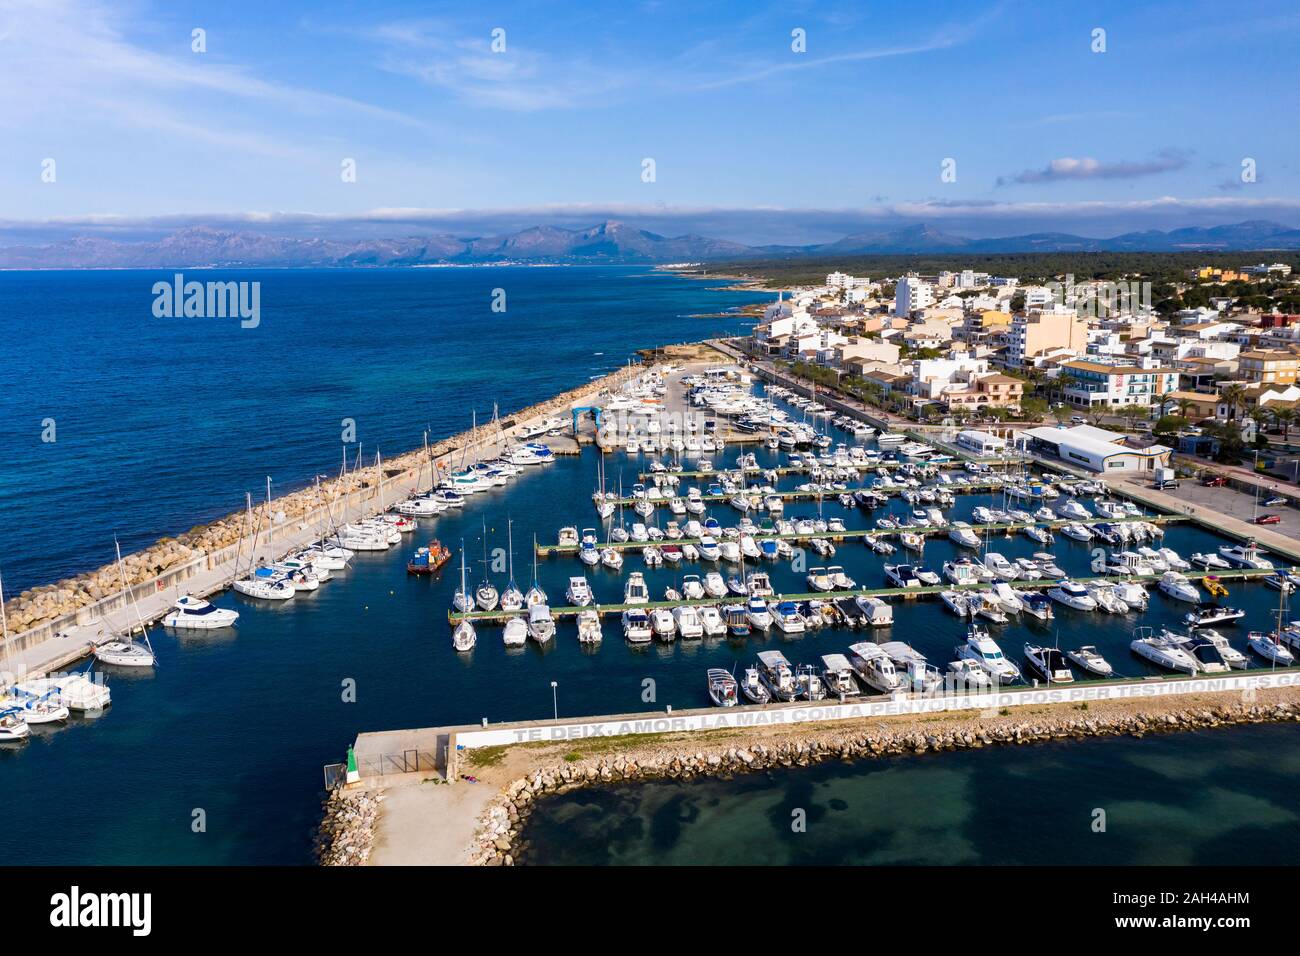 Spain, Mallorca, Aerial view of boats moored in Can Picafort resort harbor Stock Photo